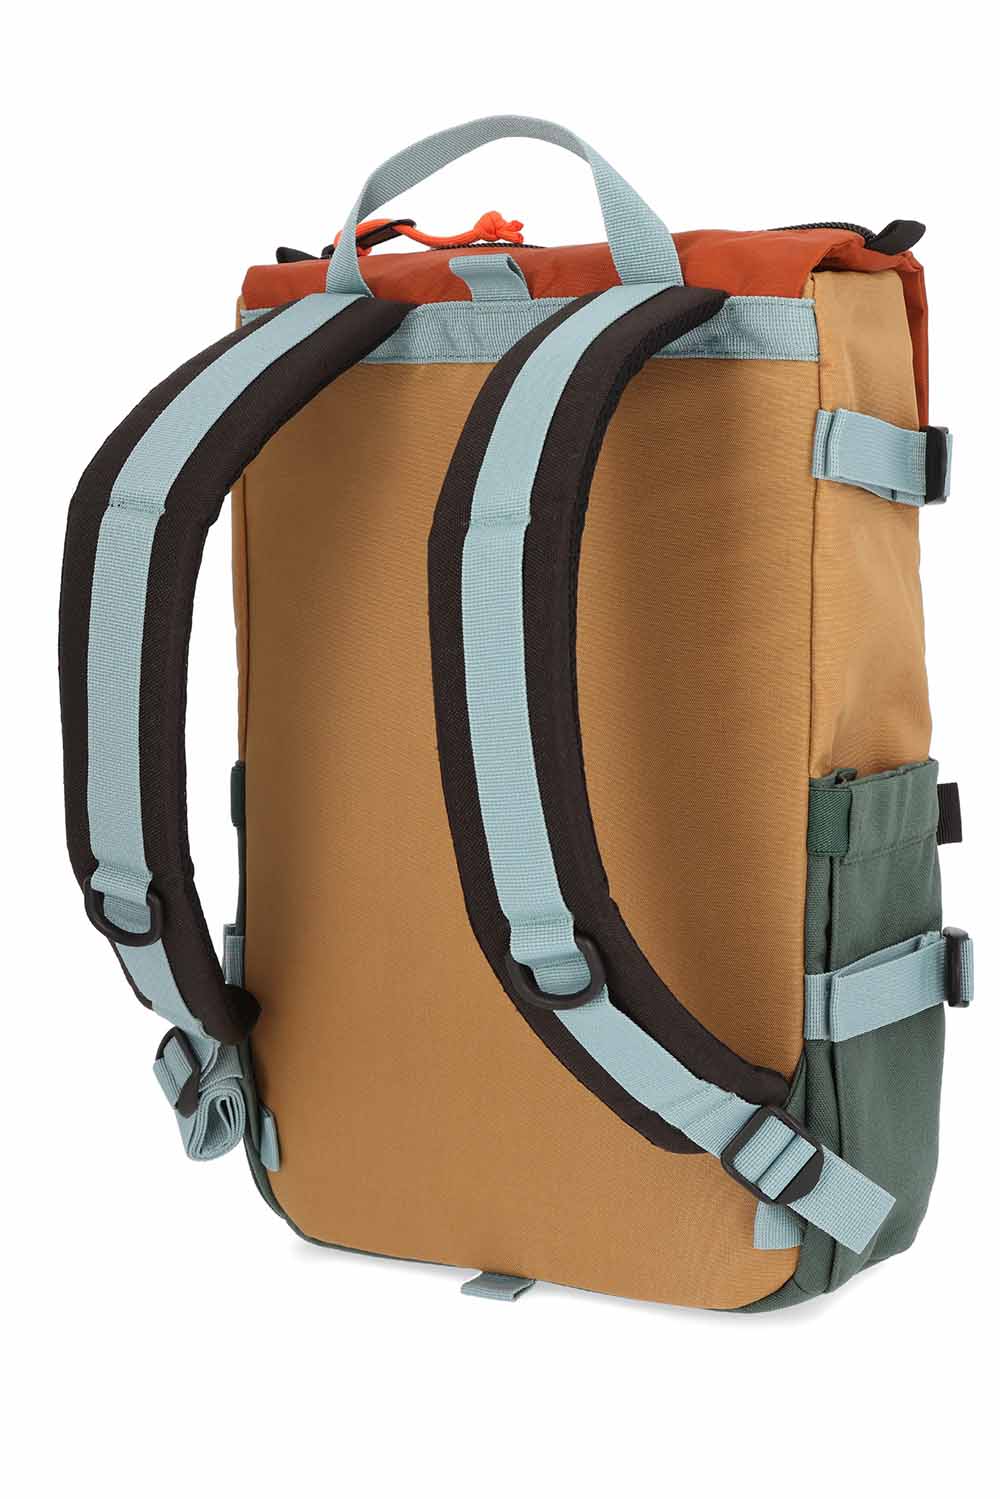 Topo - Rover Pack Classic - Forest/Khaki - Back